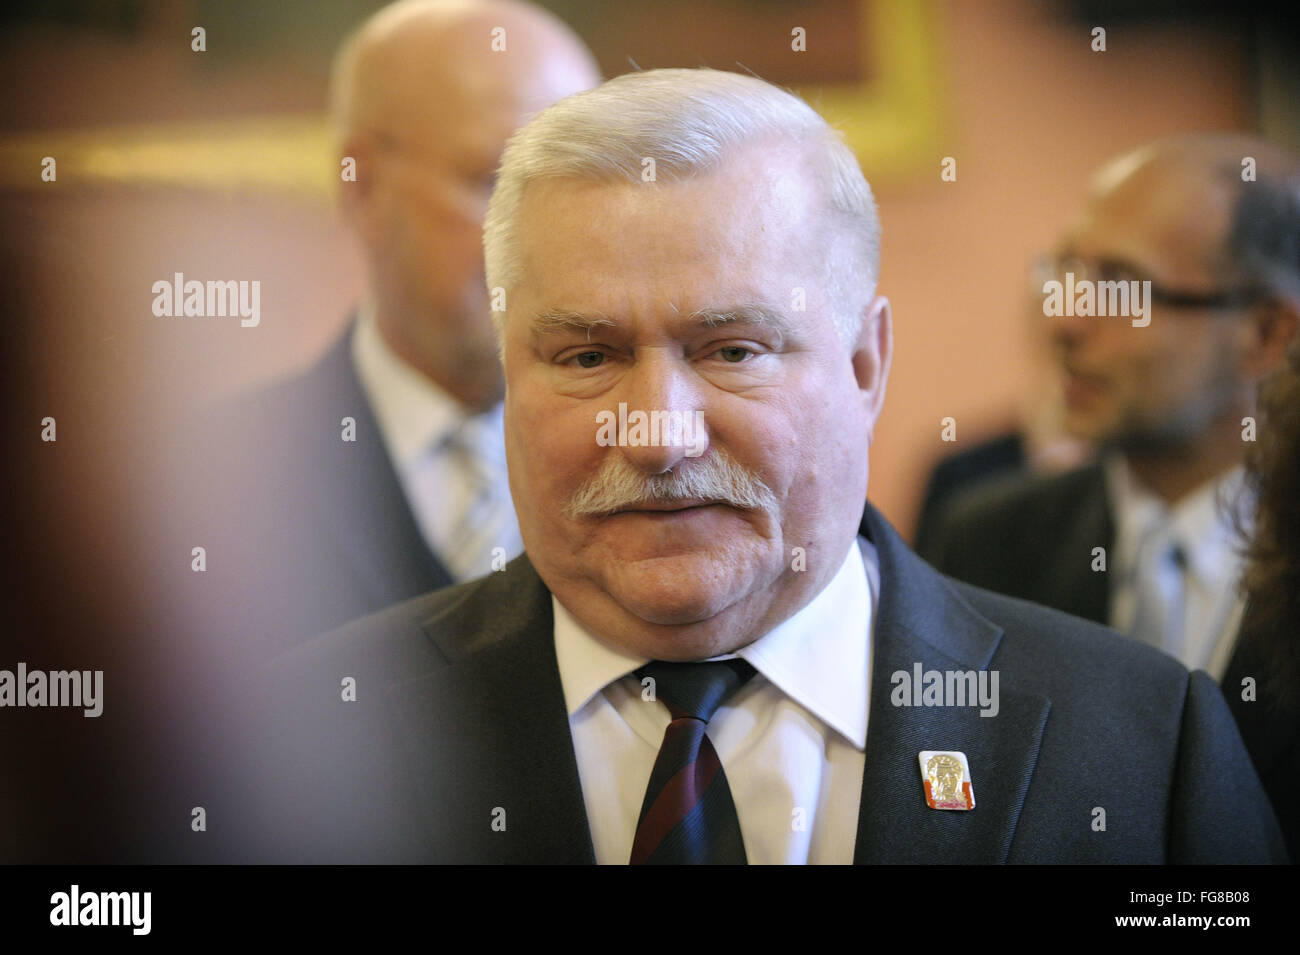 Lech Walesa, former Polish President and Nobel Peace Prize laureate 1983, seen during the ?Ernst-Reuter-Plakette? award ceremony at Berlin?s Red City Hall, Germany, 09 June 2009. Walesa is this year?s Ernst-Reuter-Prize laureate. He was honoured for his engagement for the city of Berlin. Photo: DAVID EBENER Stock Photo